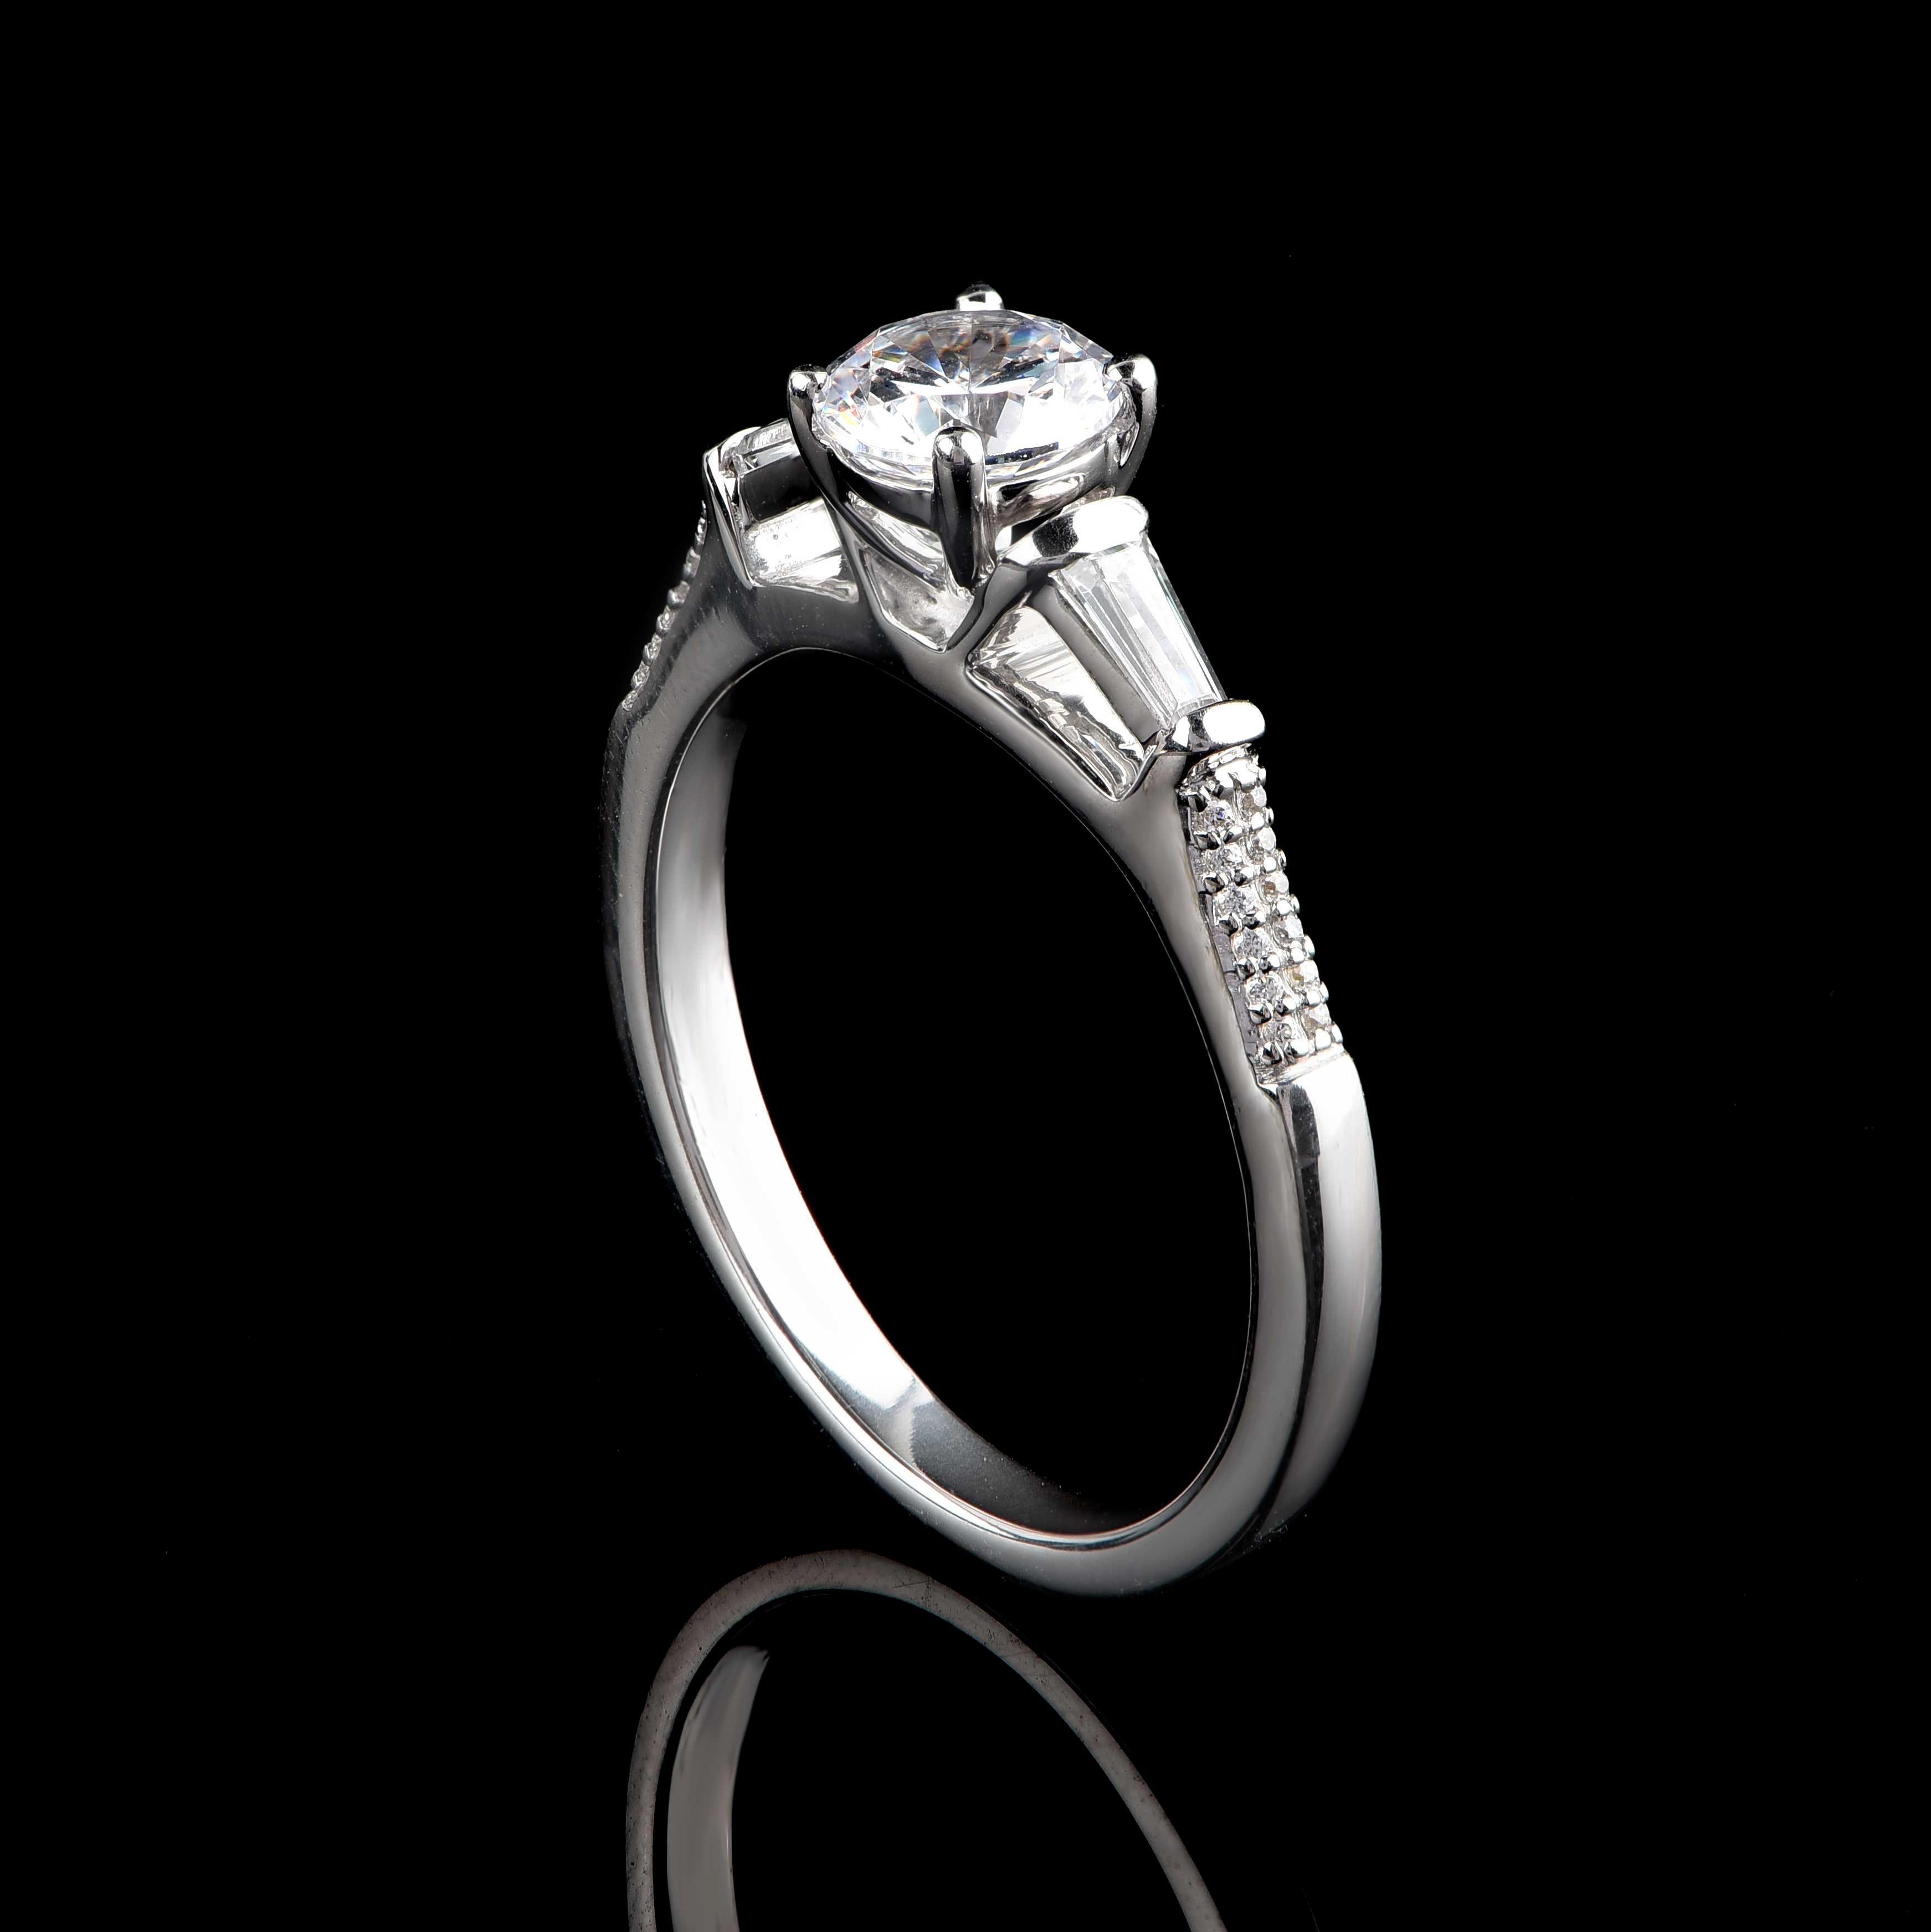 This diamond bridal ring dazzles beautifully with 24 brilliant-cut and 2 baguette-cut diamonds and 1 GIA certified centre stone set beautifully in prong, pave and channel setting - crafted in 18-karat white gold. Diamonds are graded H Color, SI1